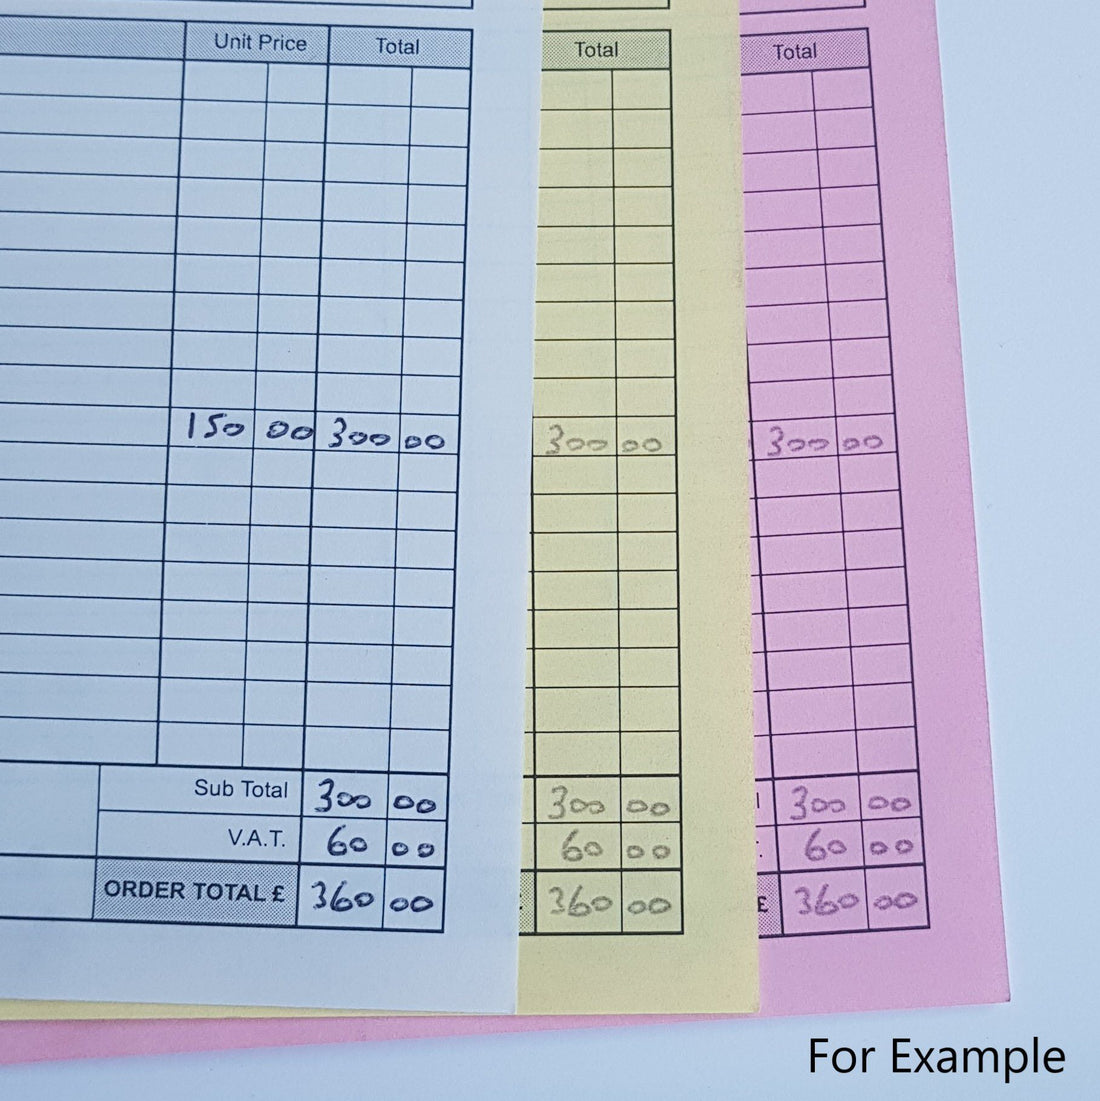 We Print Personalised Job Sheets, Invoices, Receipts, Order Forms, Accident Forms etc.